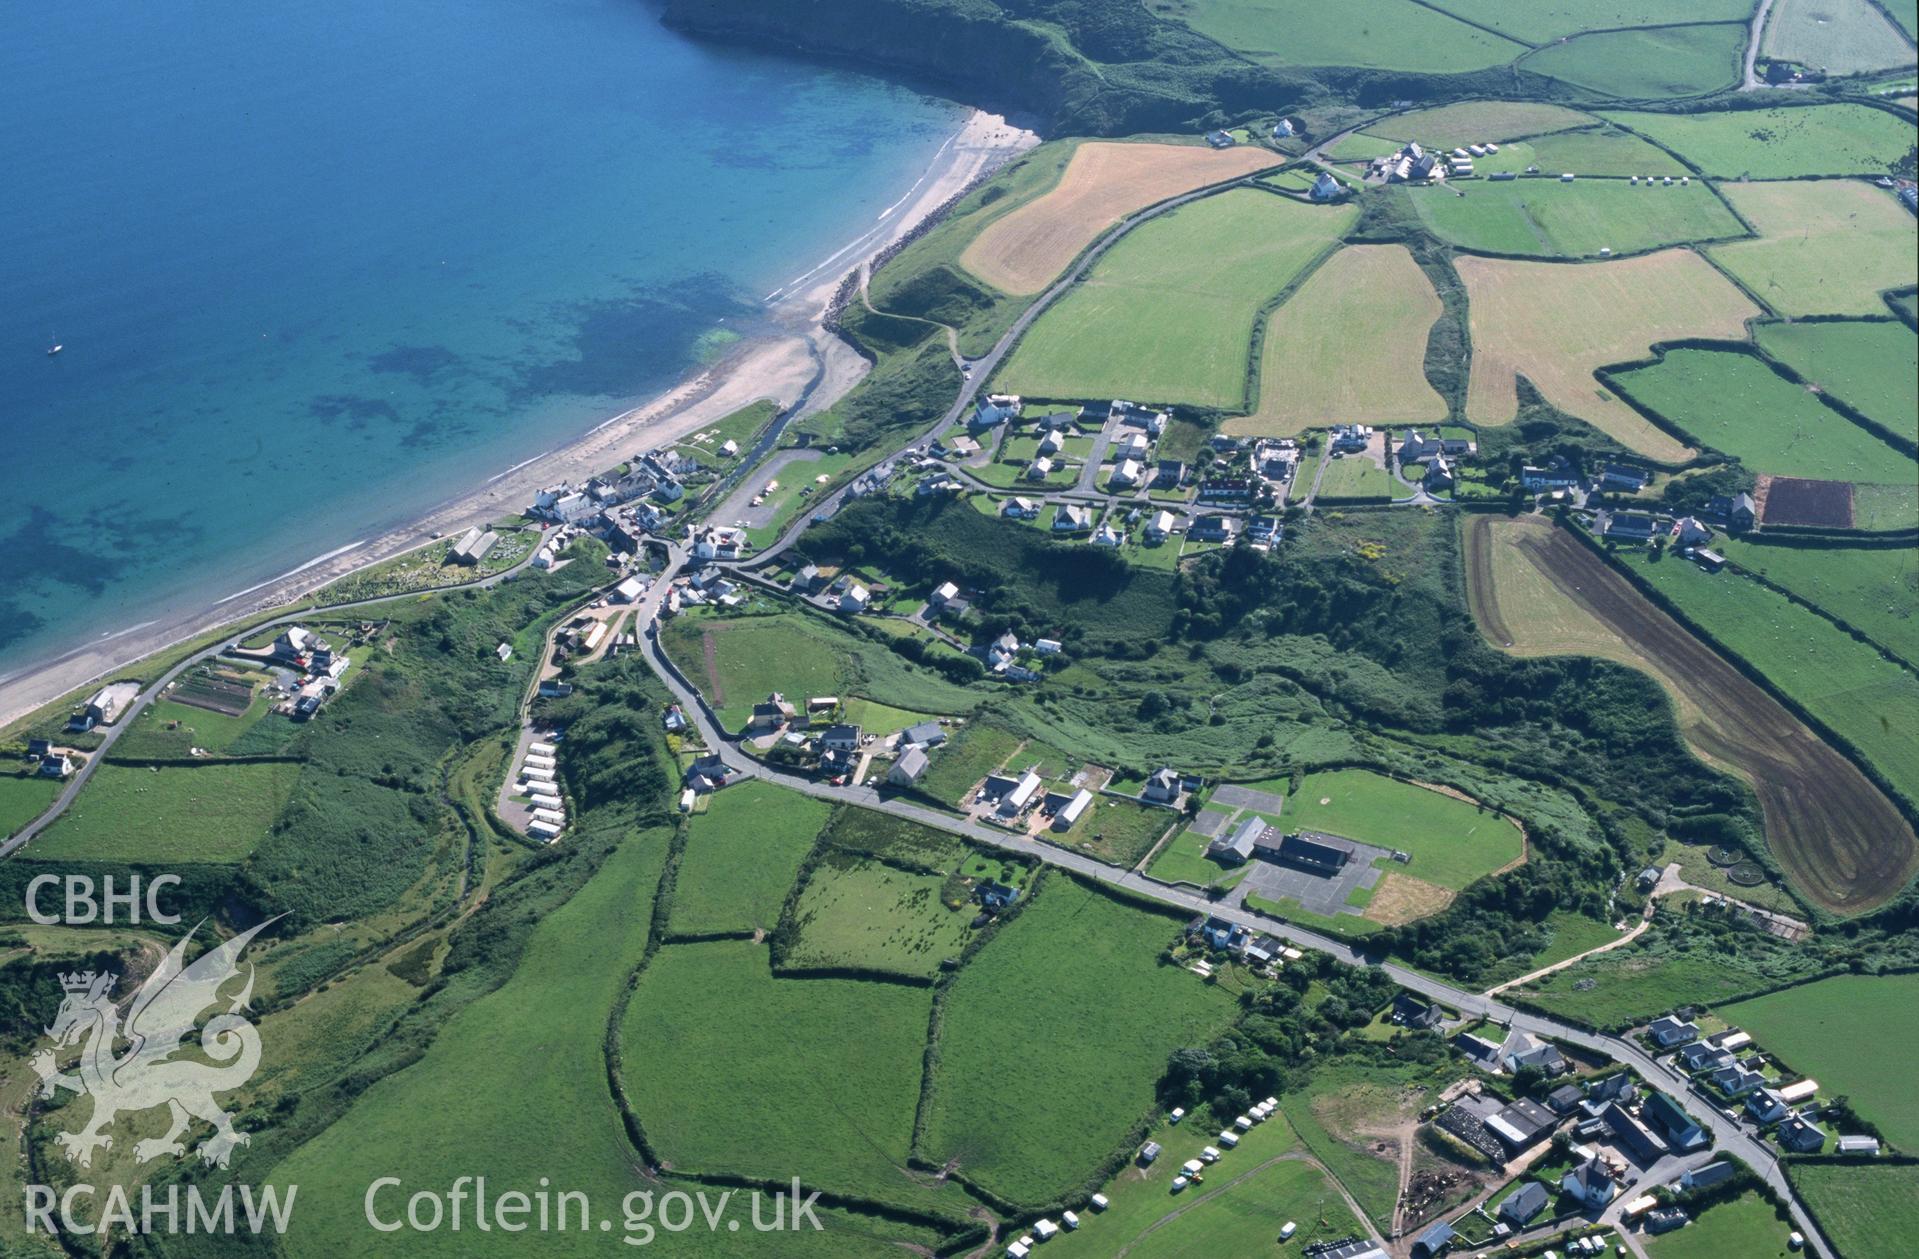 Slide of RCAHMW colour oblique aerial photograph of Aberdaron, taken by T.G. Driver, 26/6/2000.